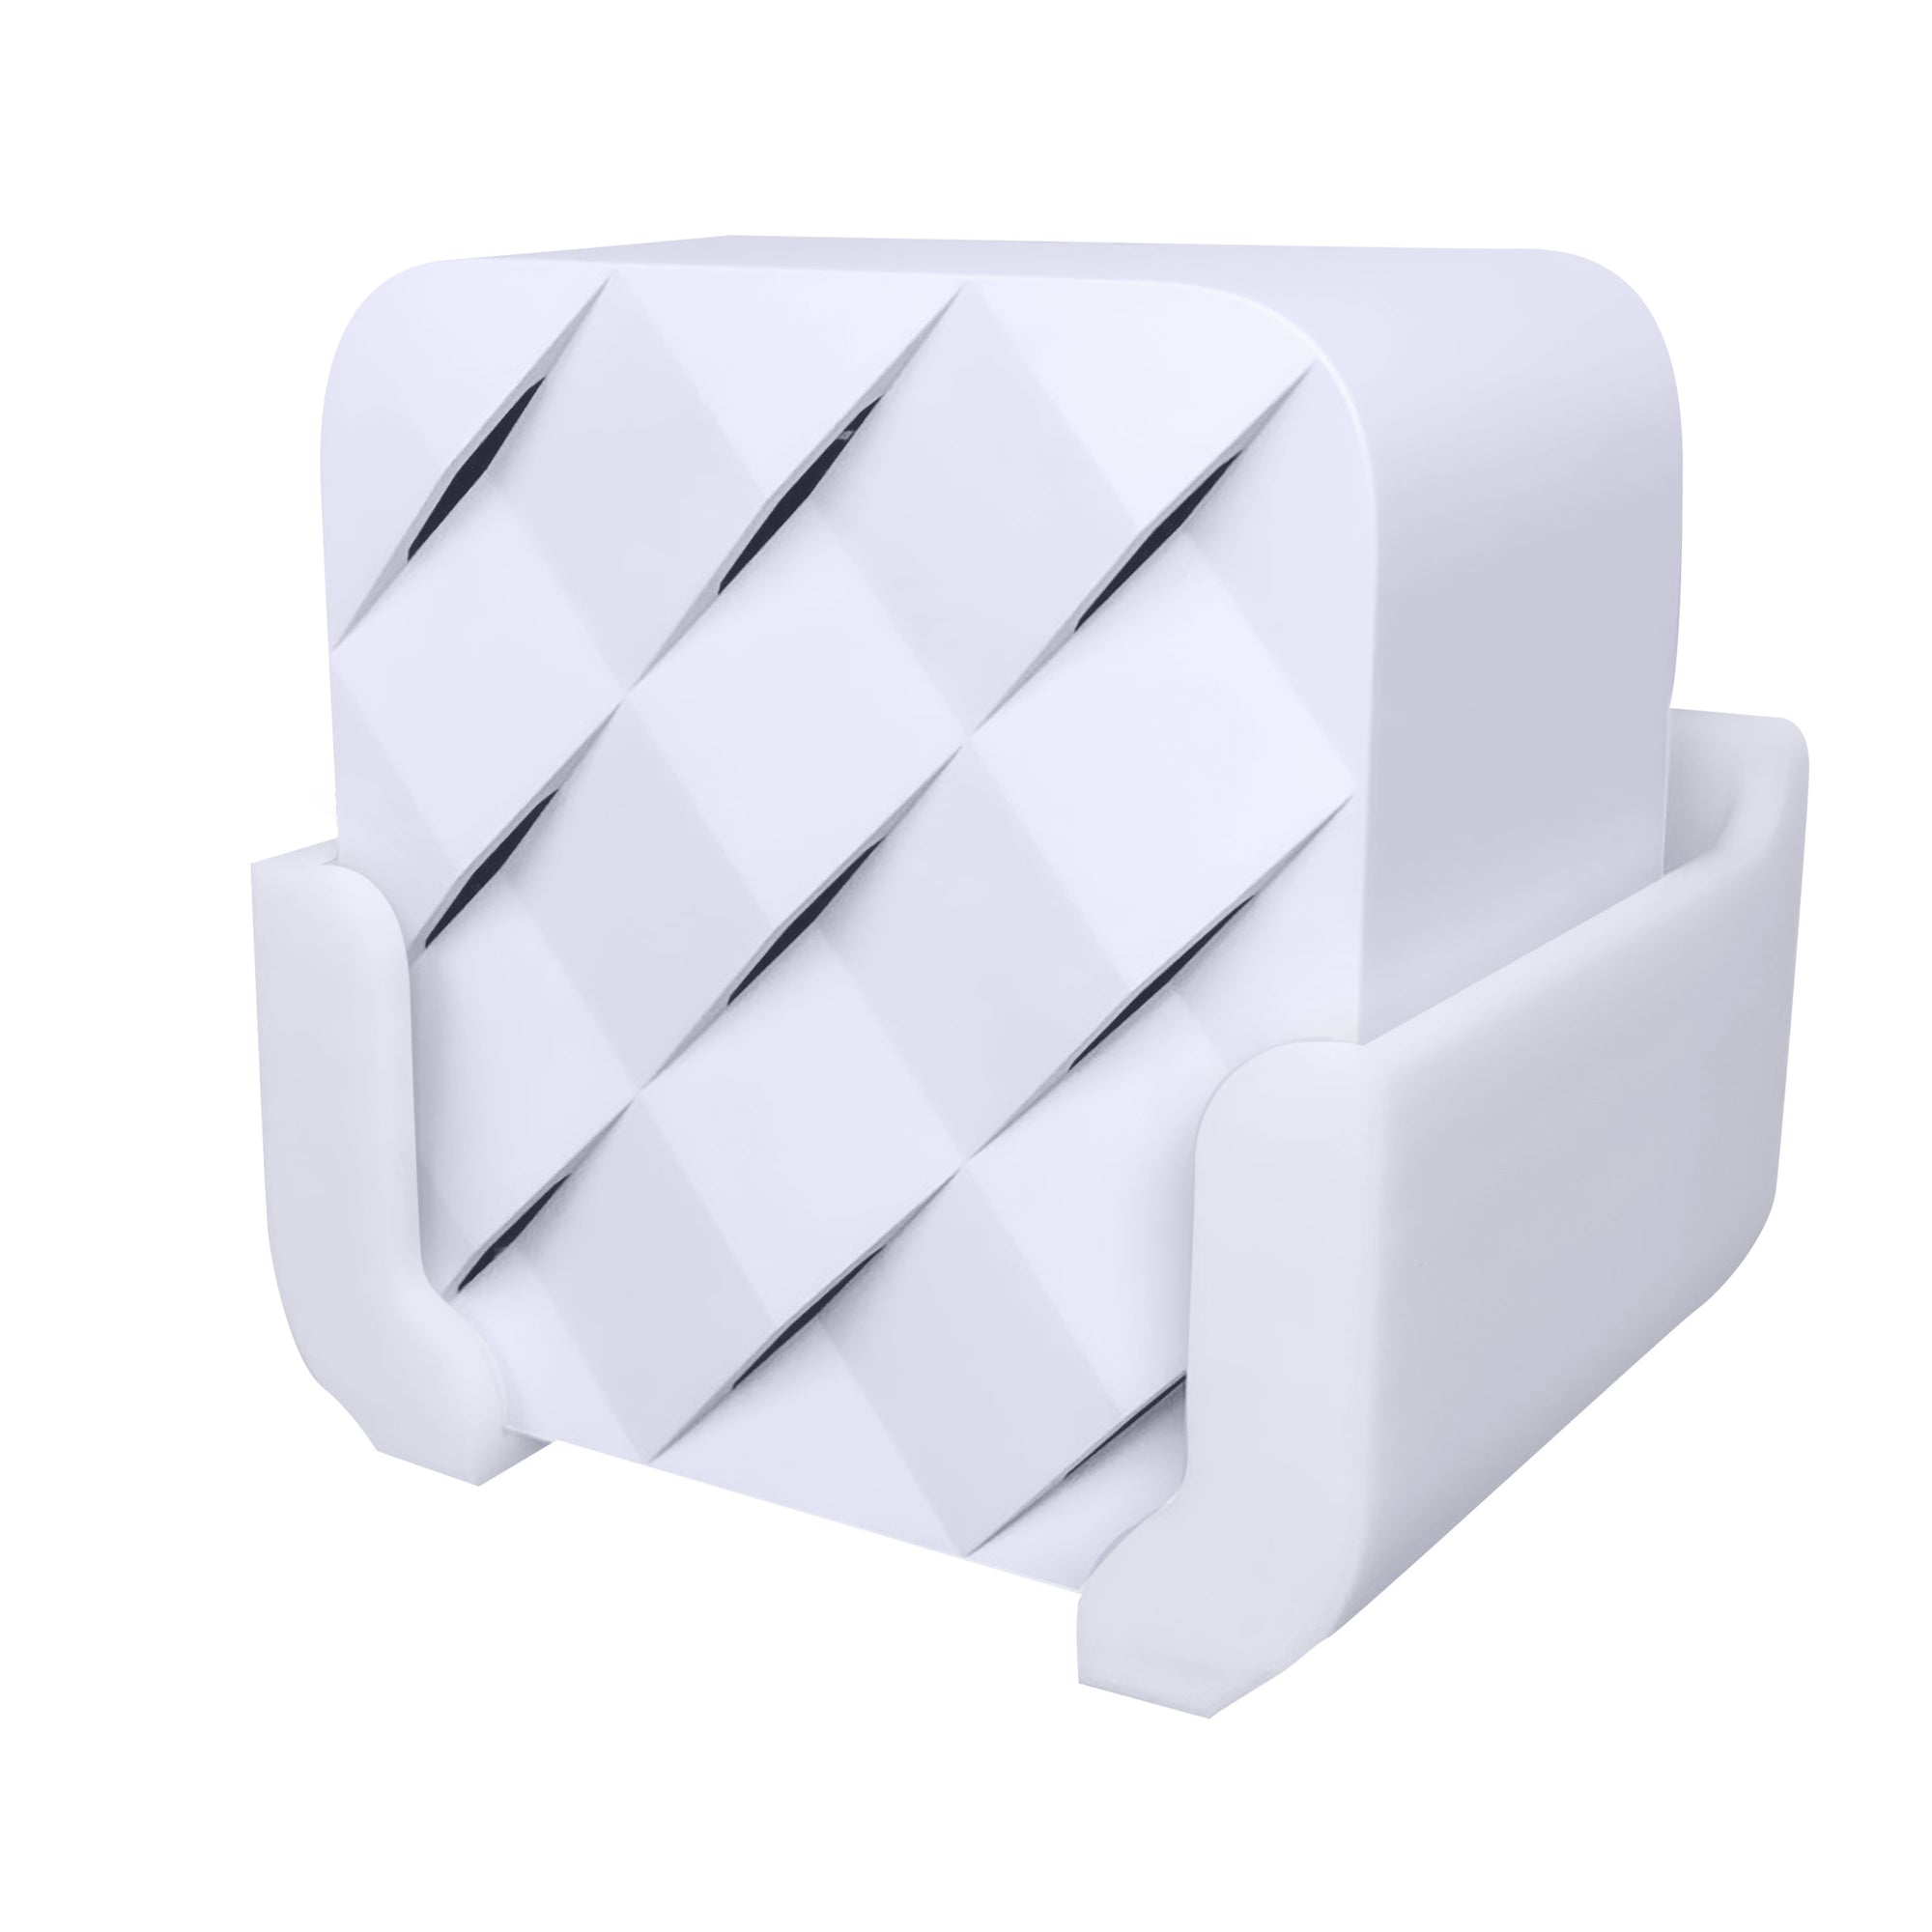 Adhesive Wall Mount For Netgear Orbi RBK13 Router, Strong VHB Adhesive, Easy to Install, Reduce Interference & Increase Range, Stick On & Screw-in Mounting